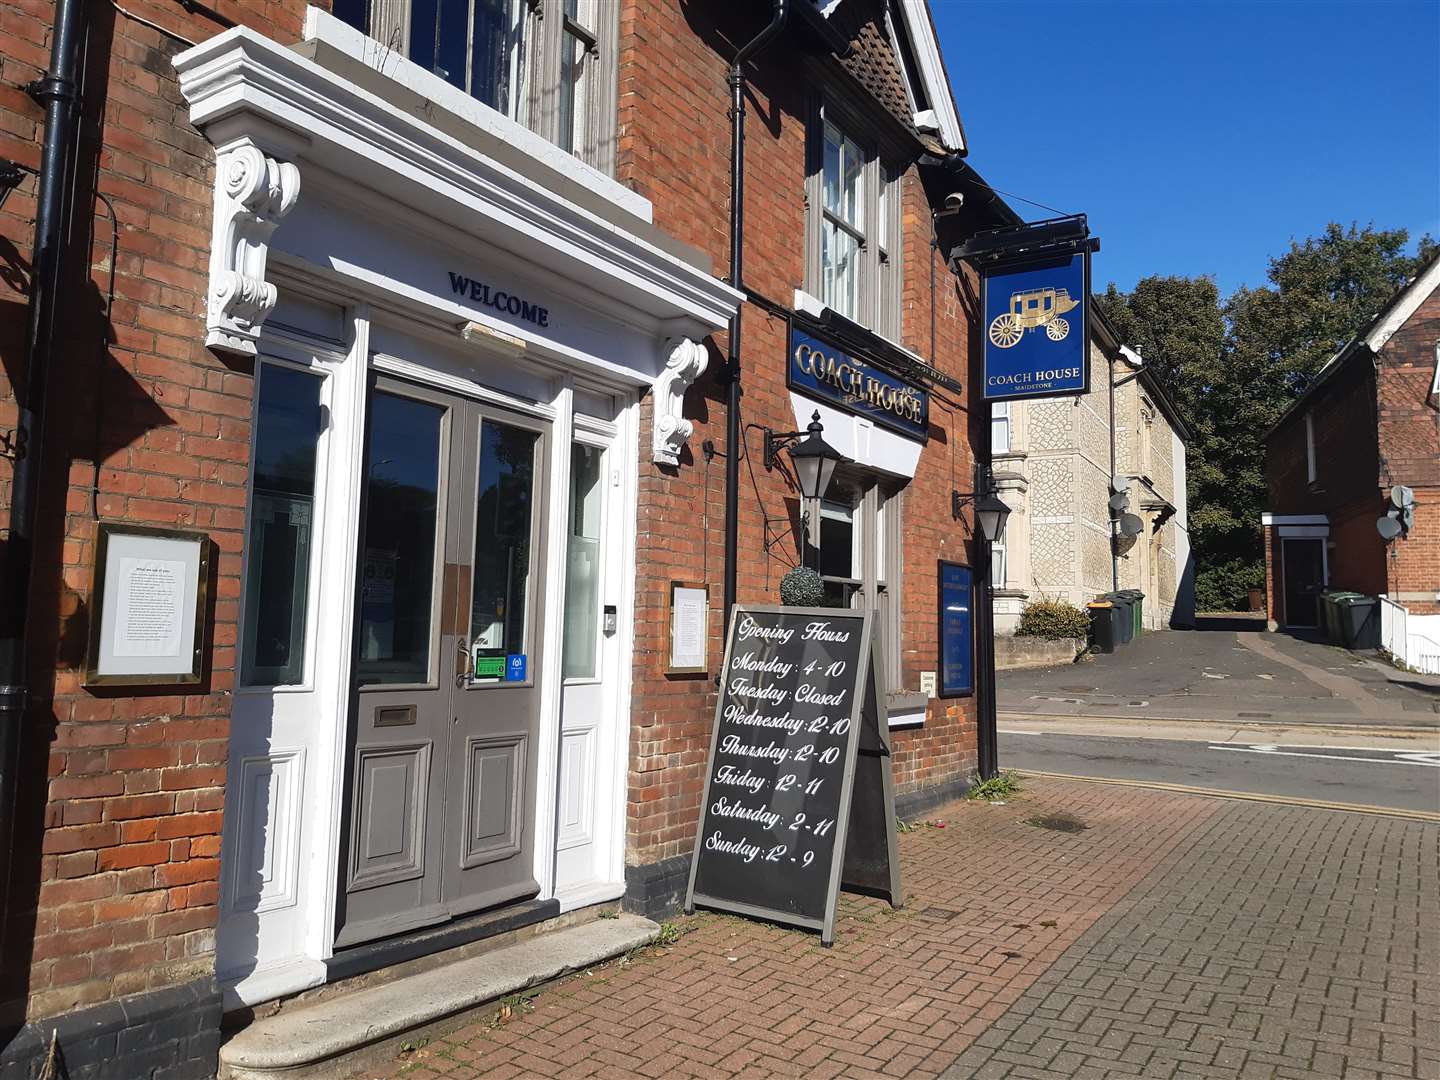 It changed its name to the Coach House two years ago, but the pub took on a new personality when Steve and Kate took charge just over a year ago